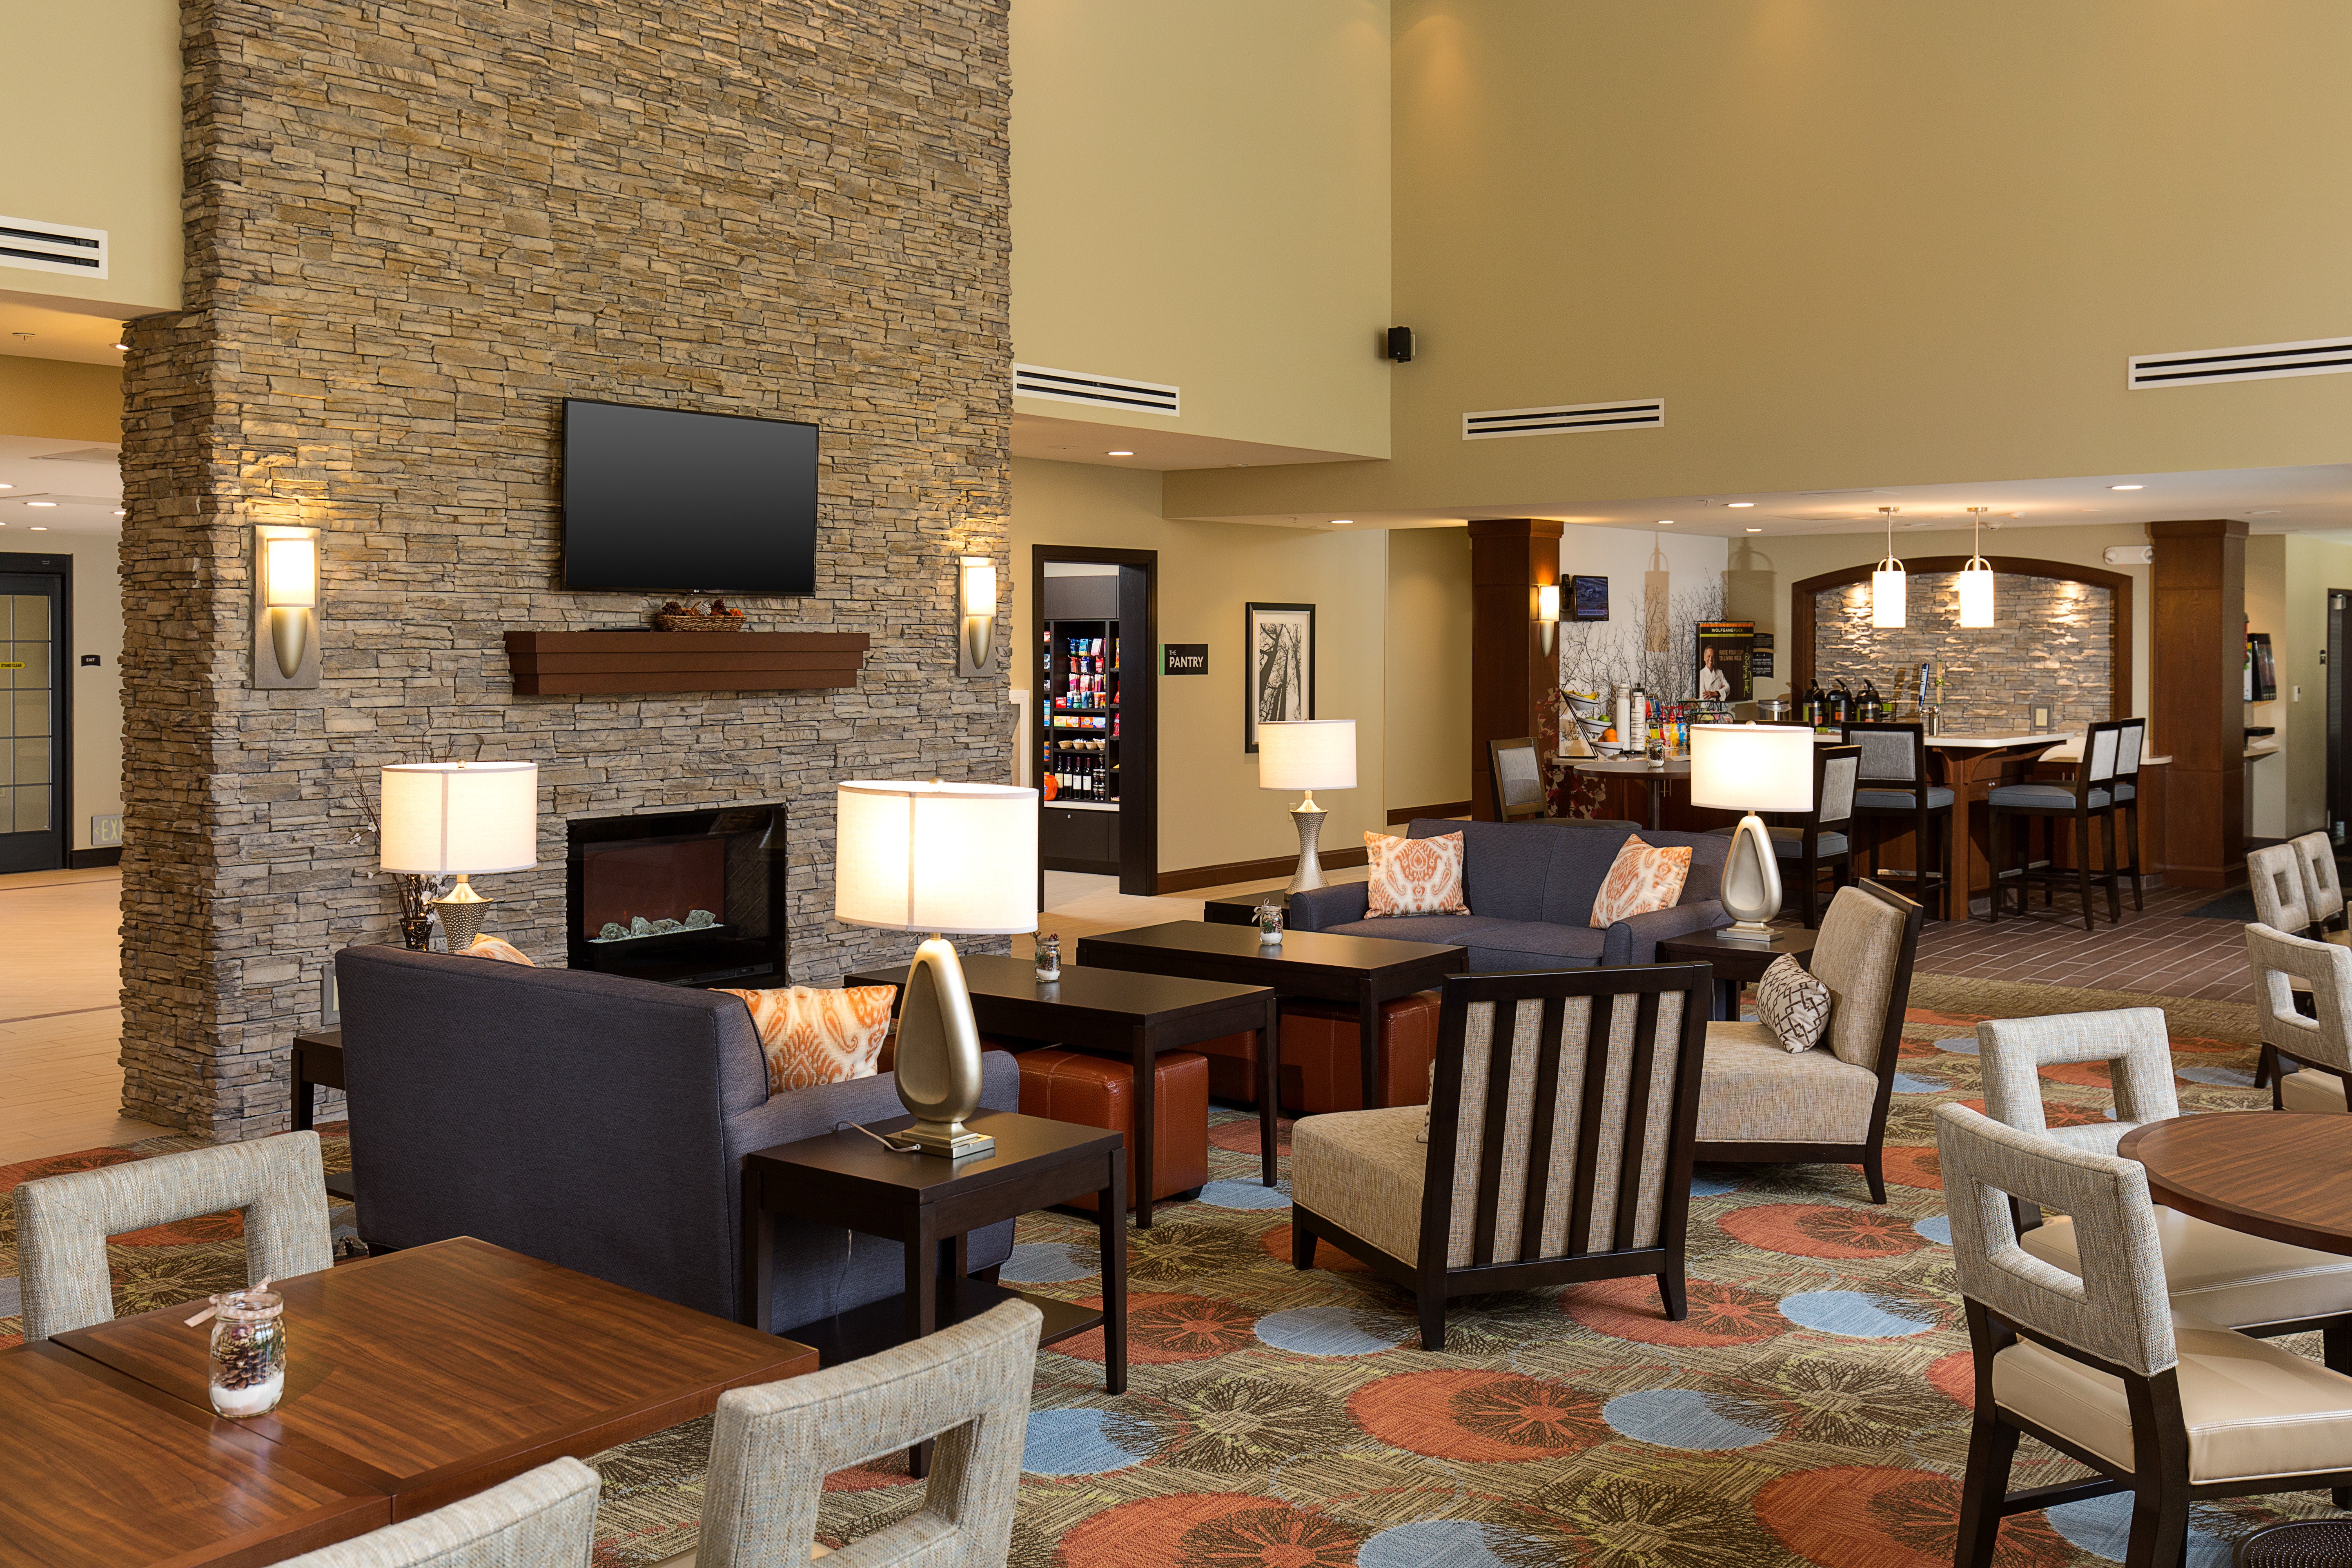 Our spacious lobby provides fireplace, TV and many seating options